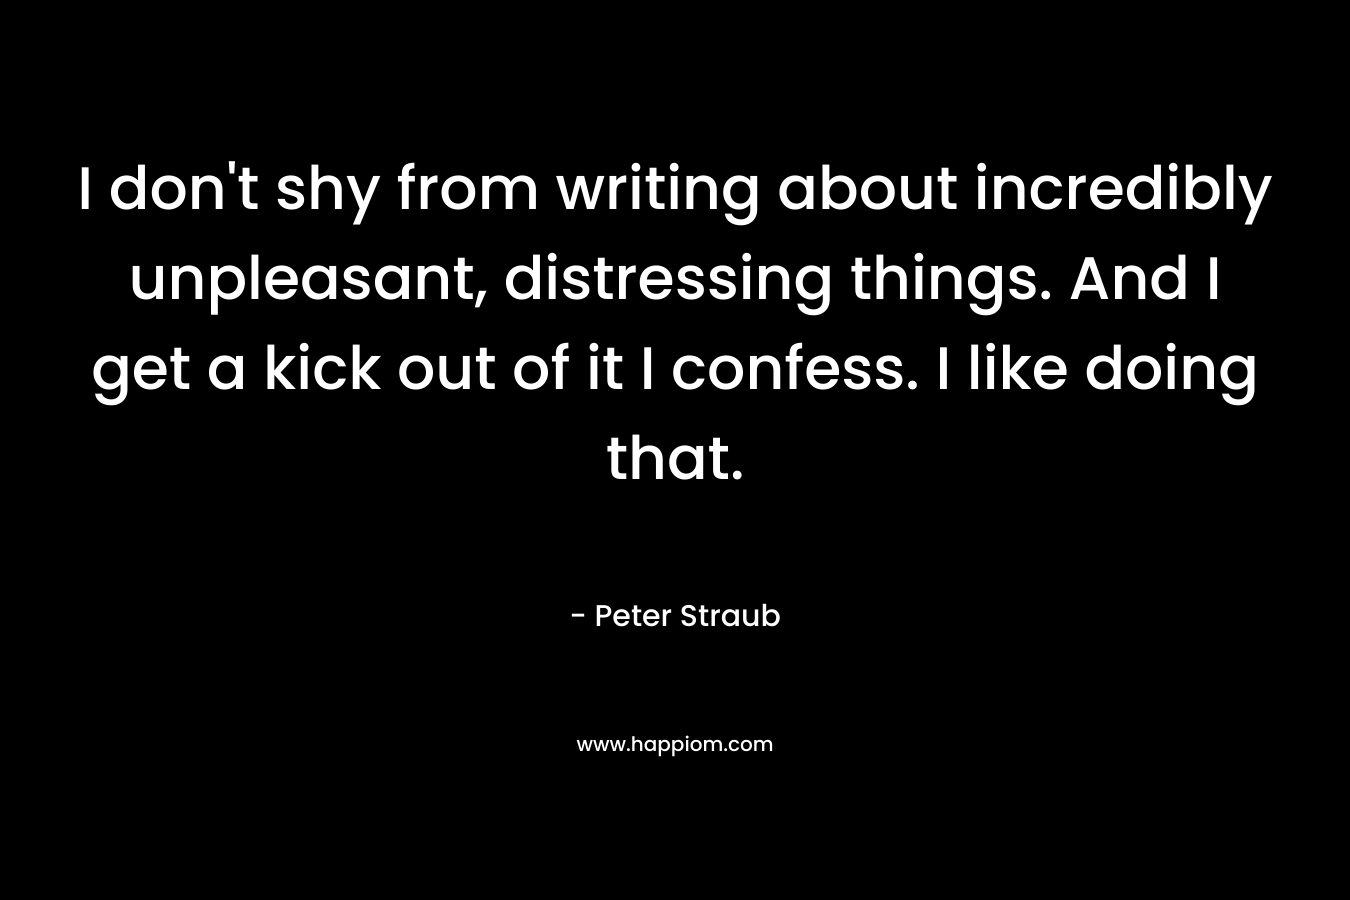 I don’t shy from writing about incredibly unpleasant, distressing things. And I get a kick out of it I confess. I like doing that. – Peter Straub